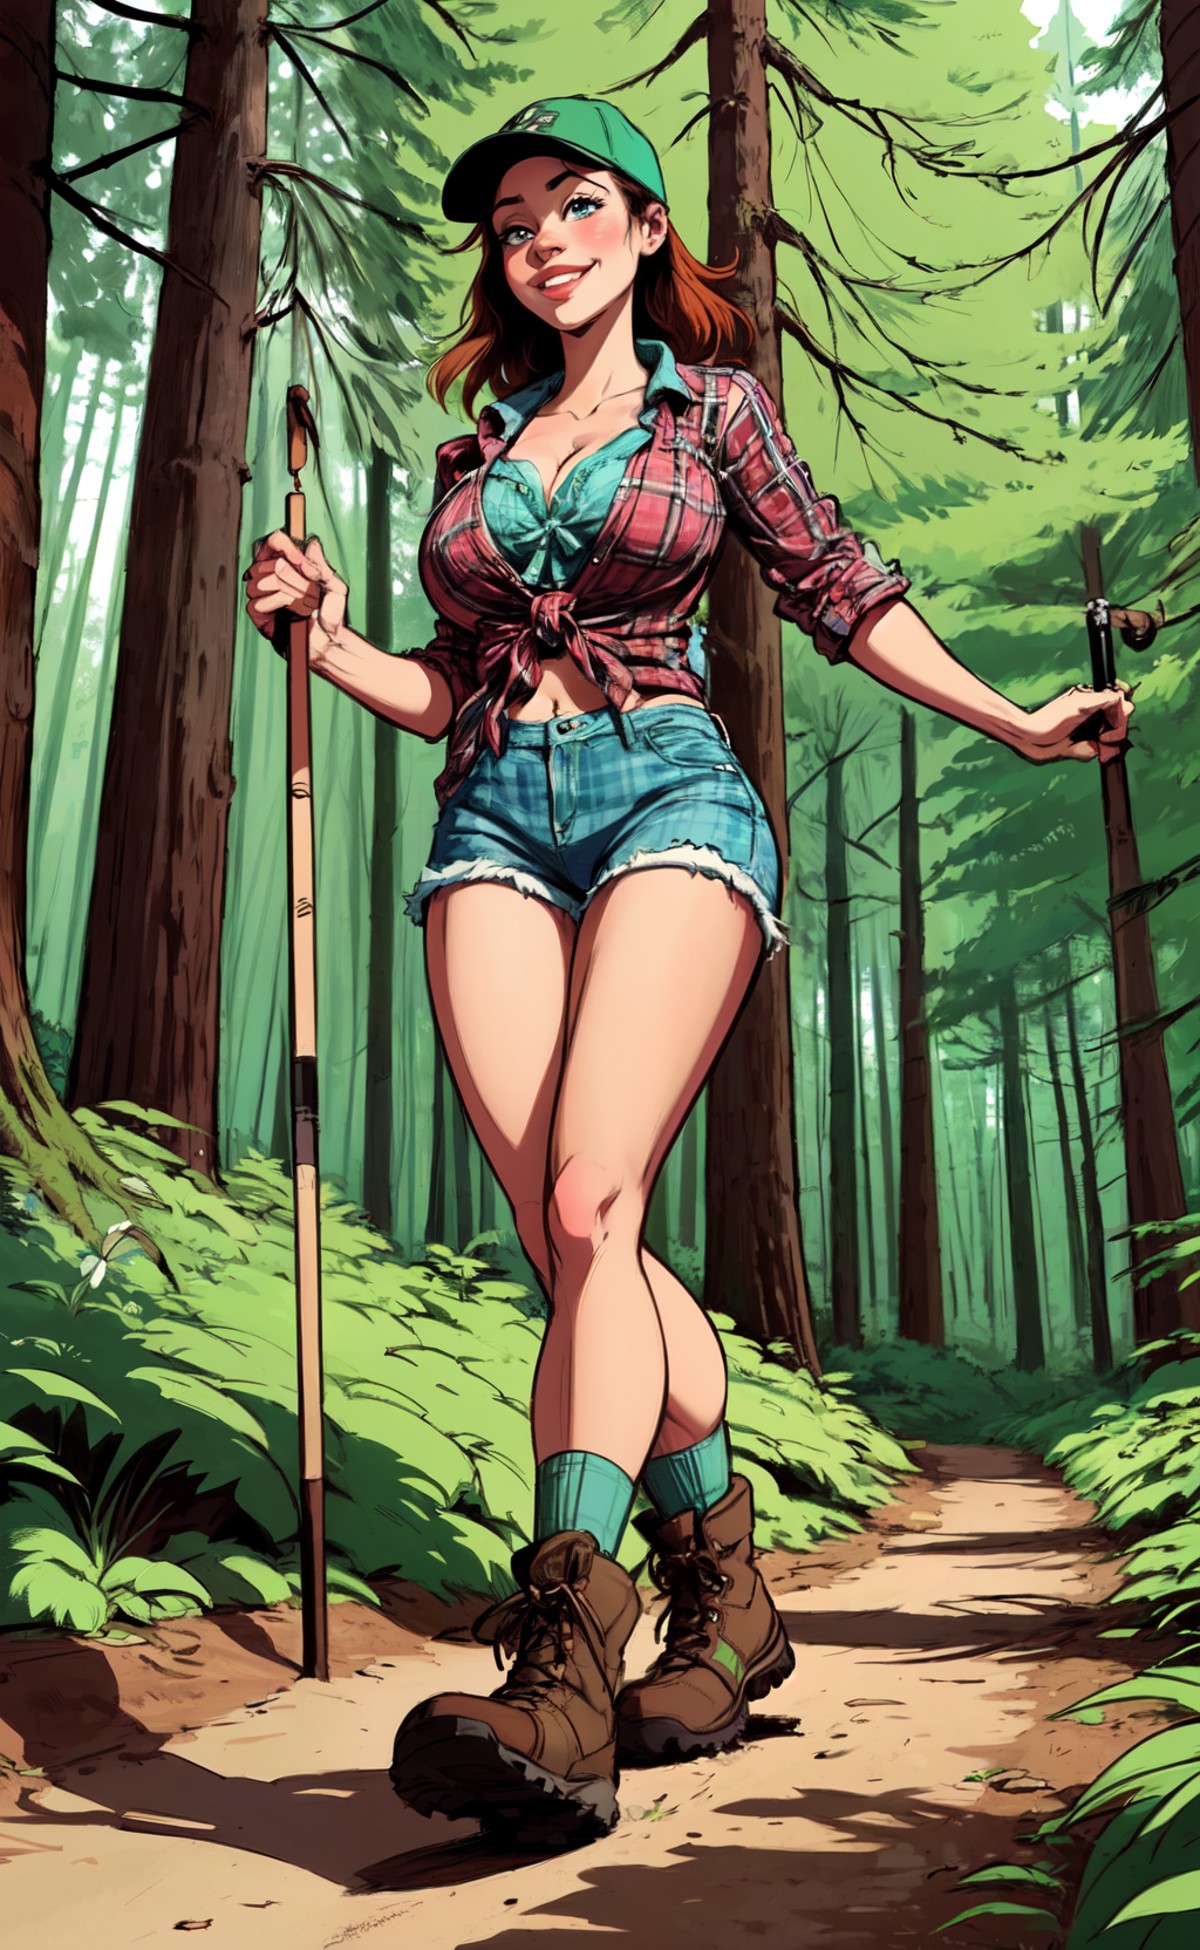 (cartoonish style), (low contrast:.9), drawing of a cute woman hiking in the woods, tall trees, shady, wearing a tied-off ...